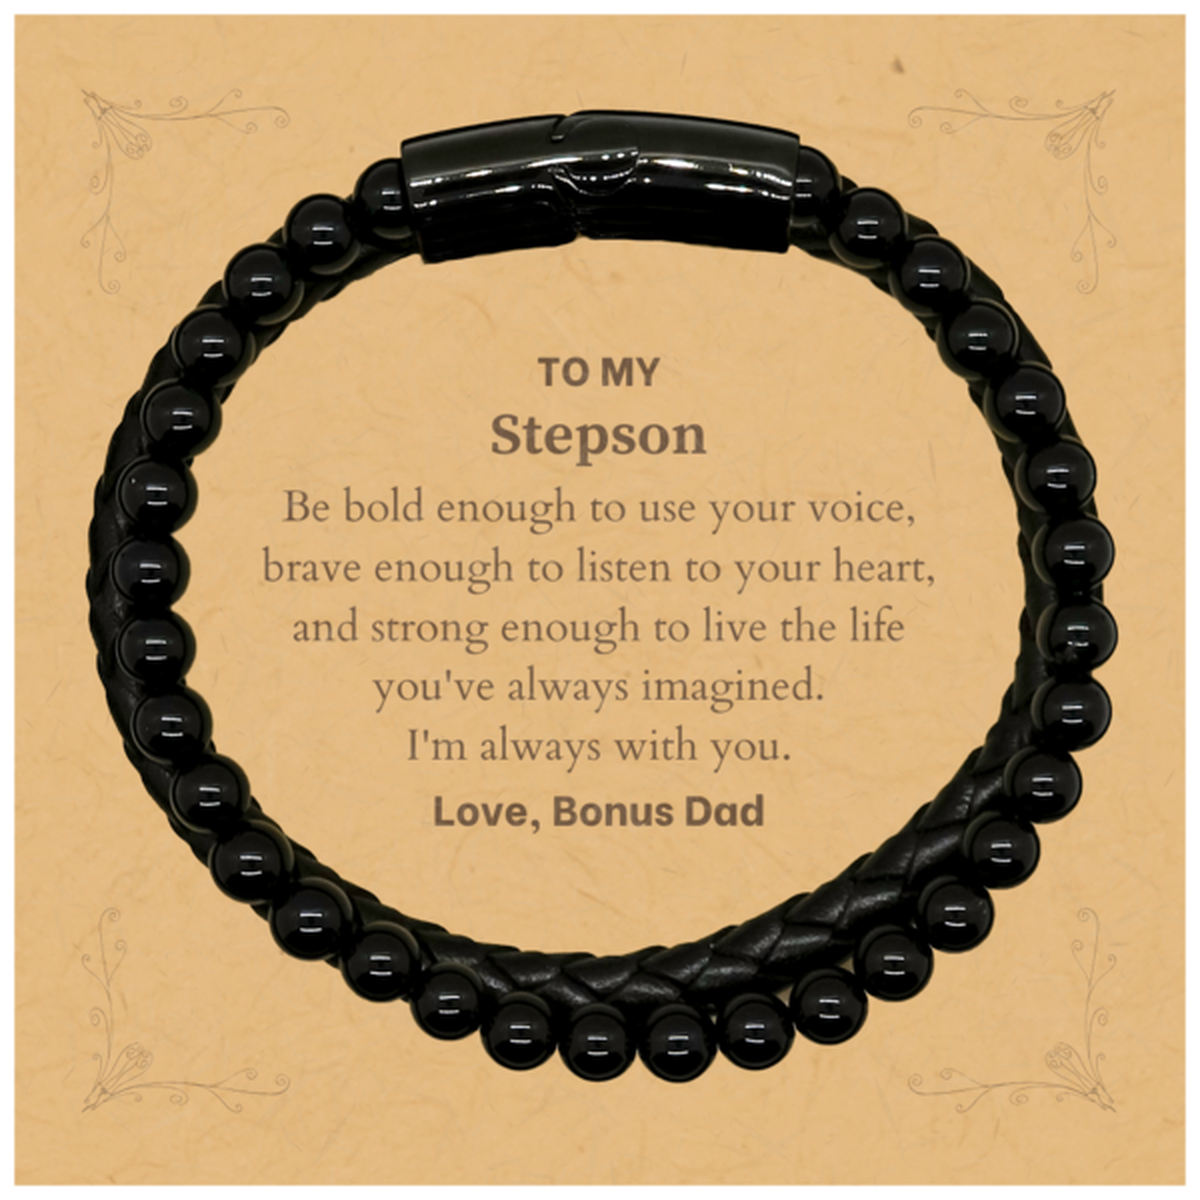 Keepsake Stepson Stone Leather Bracelets Gift Idea Graduation Christmas Birthday Stepson from Bonus Dad, Stepson Be bold enough to use your voice, brave enough to listen to your heart. Love, Bonus Dad